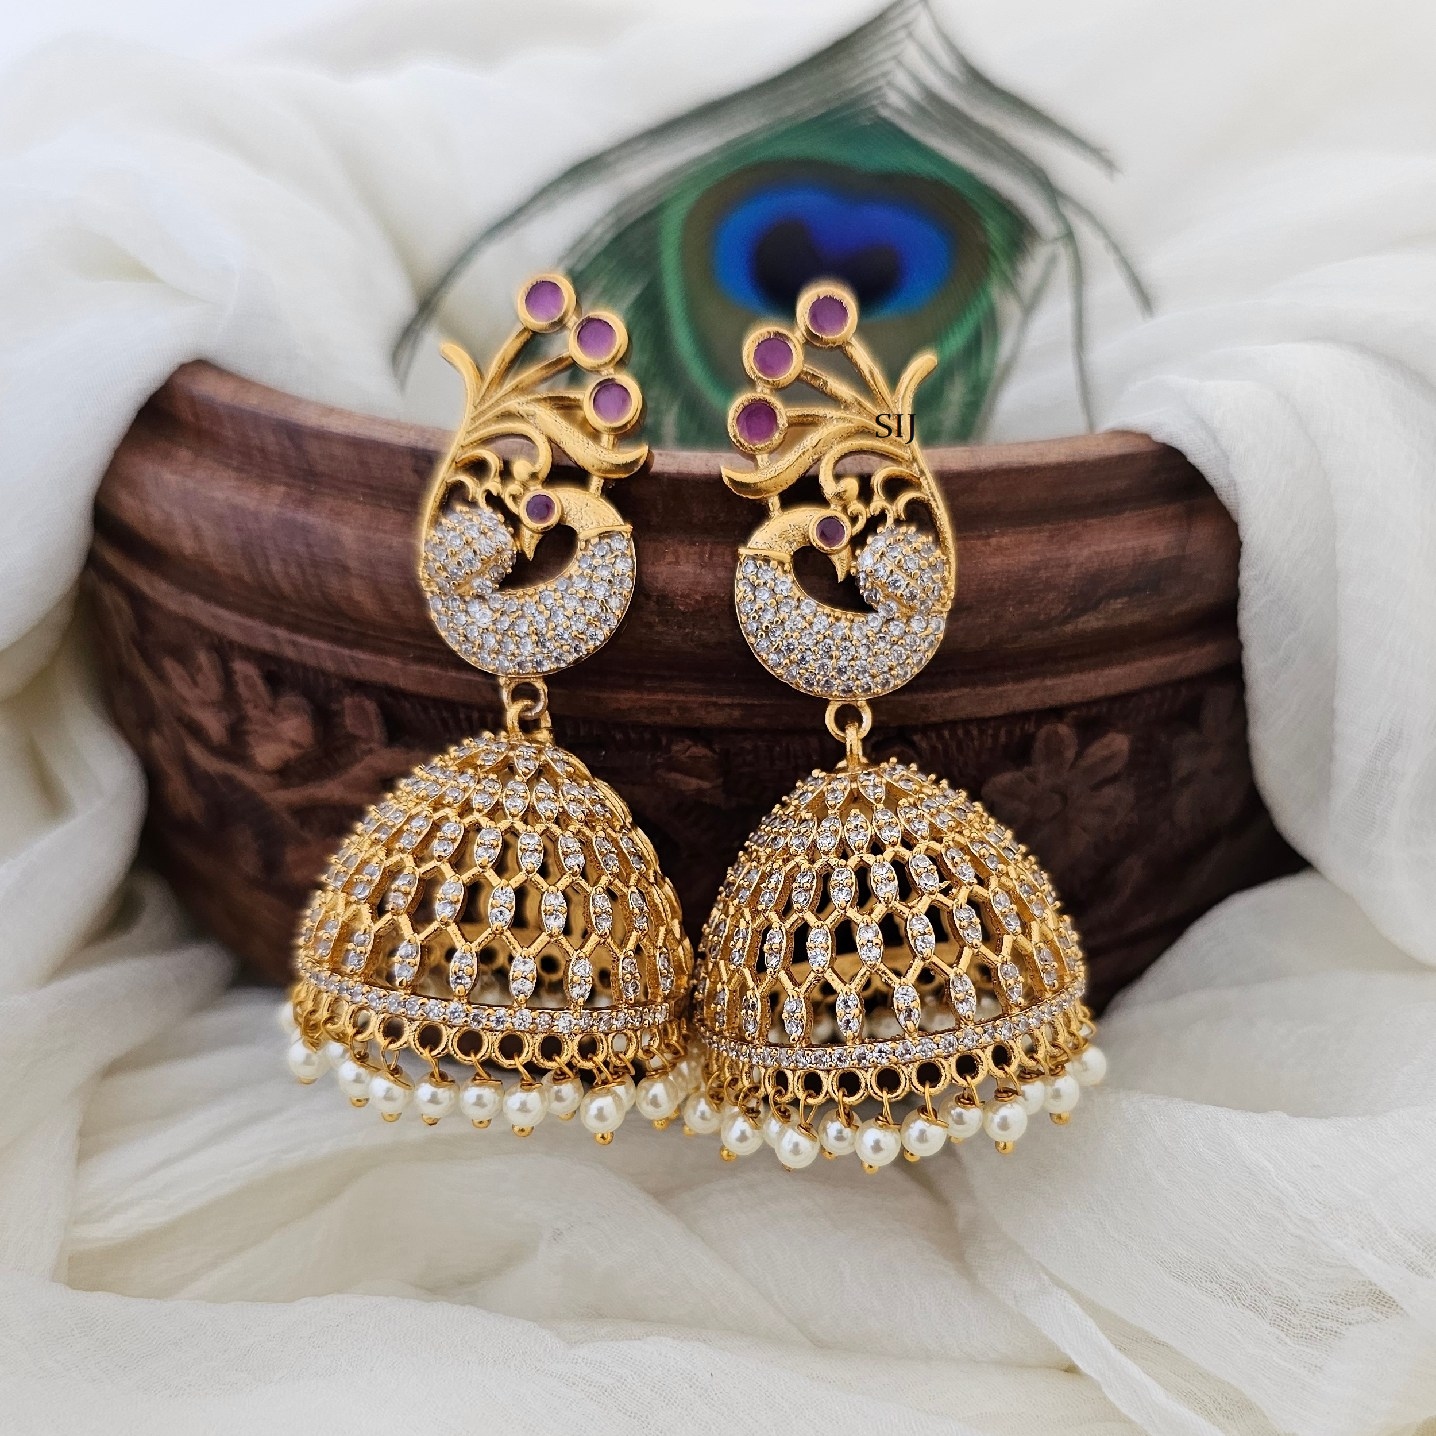 These exquisite peacock jhumkas boast a lavish gold finish, adorned with sparkling CZ and radiant ruby stones. Inspired by traditional elegance, they blend opulence with sophistication, perfect for adding a touch of glamour to any ensemble. Each intricately crafted piece exudes timeless beauty and unparalleled craftsmanship.